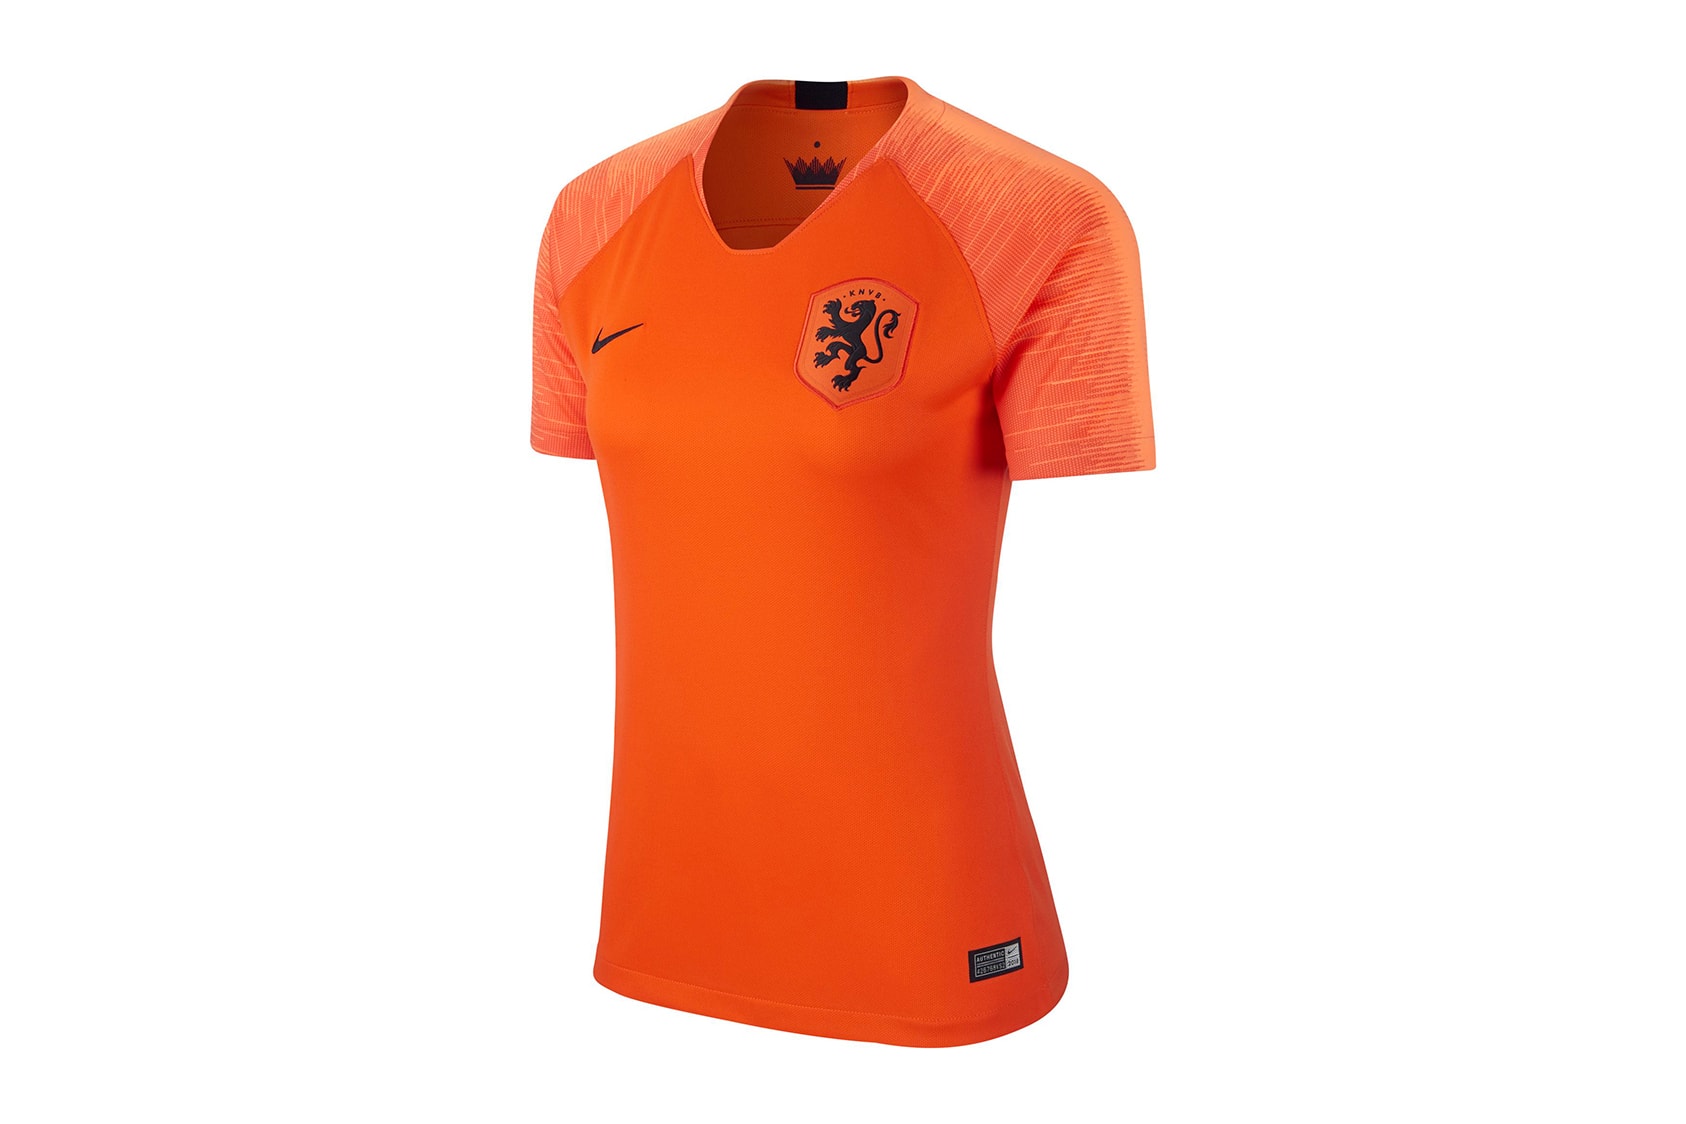 Nike Football Netherlands 2018 National Team Kits Soccer Orange Holland Dutch FIFA World Cup Total Football How to Buy Release Details Closer Look Information News Announcement Reveal Unveil